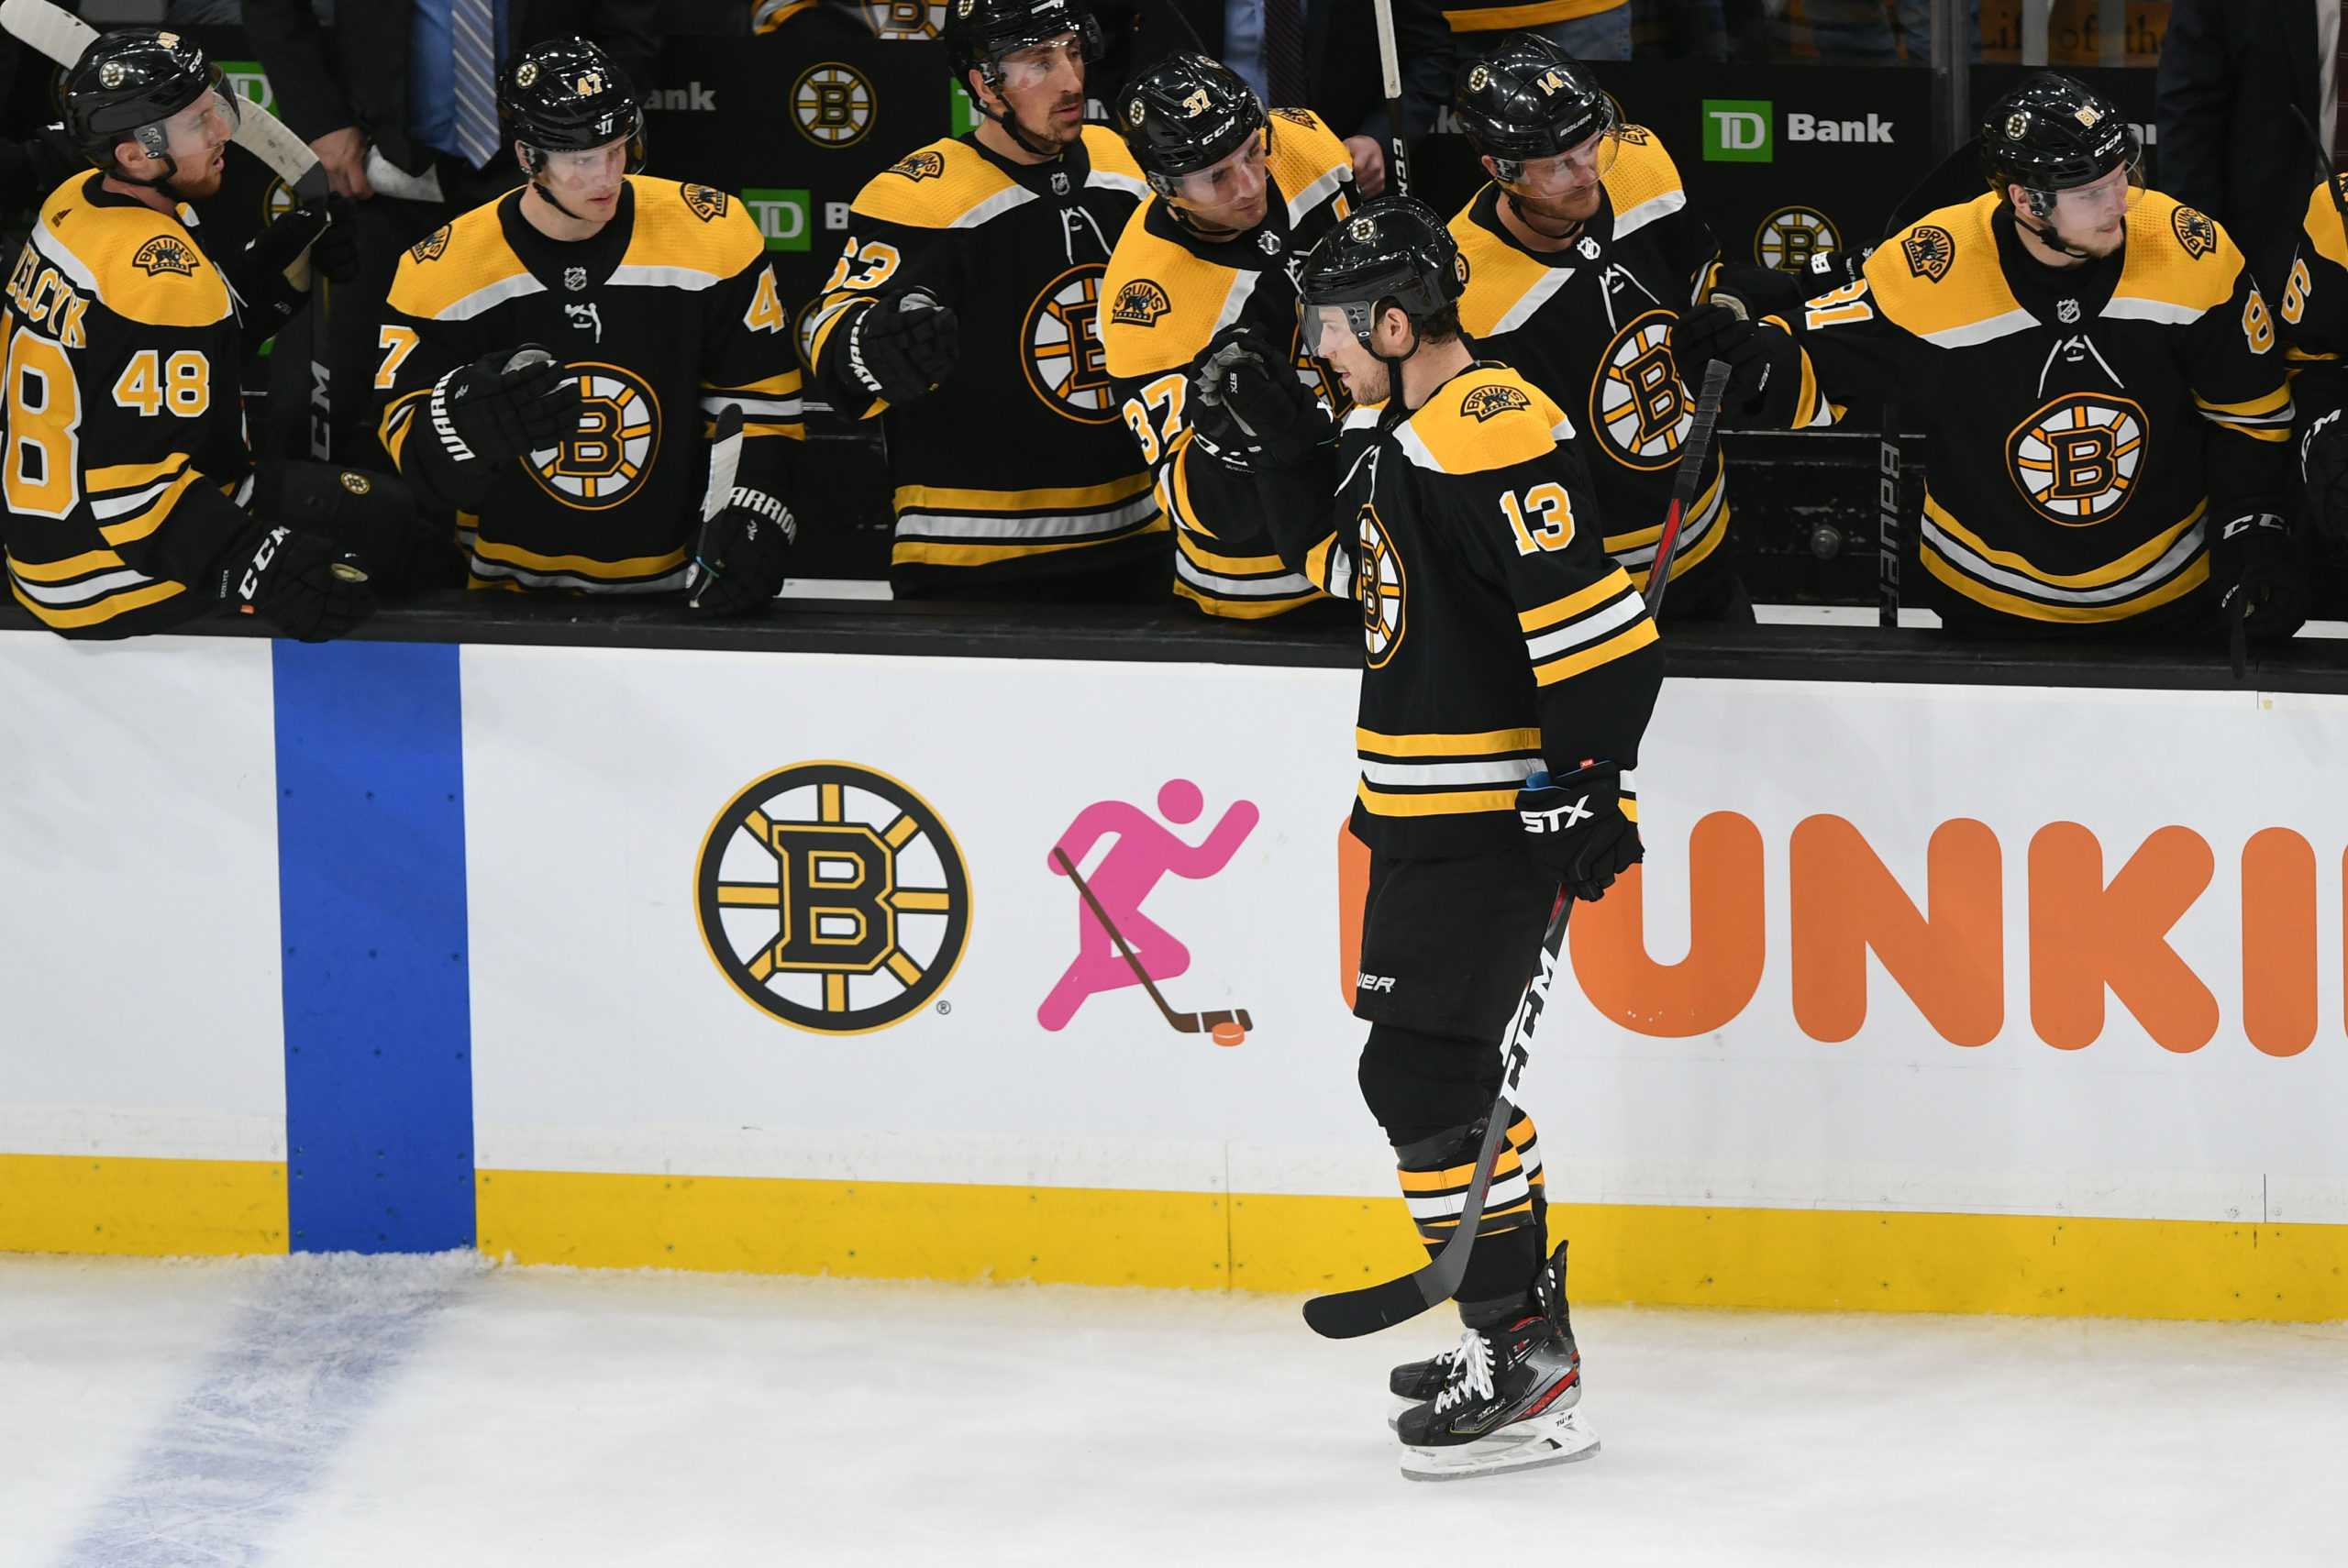 Bruins Hold On for Win